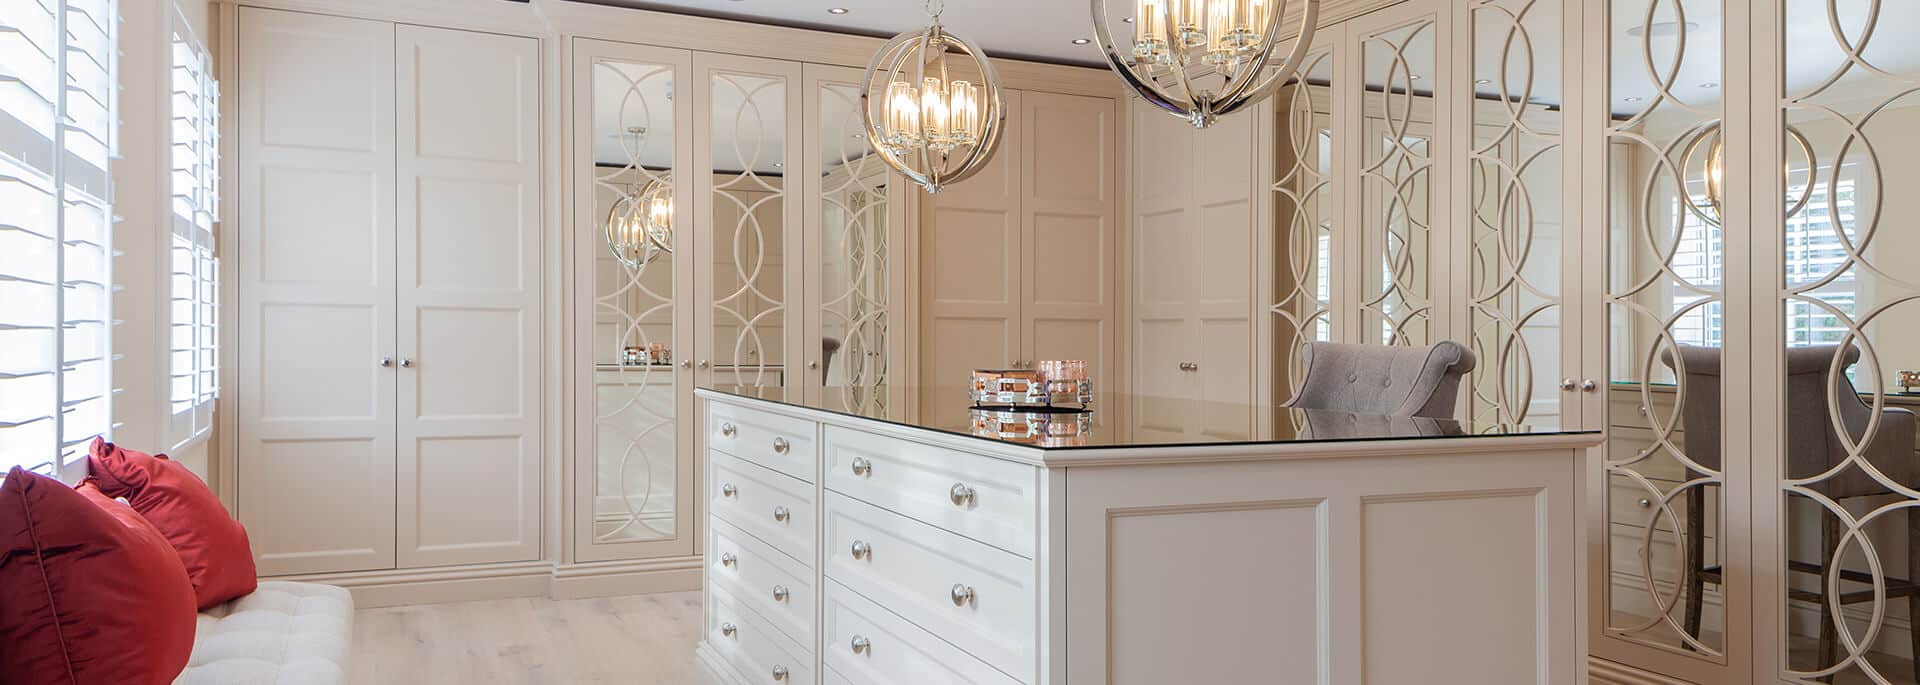 10 walk-in wardrobe ideas to help you create your dream dressing room |  Domicile Design